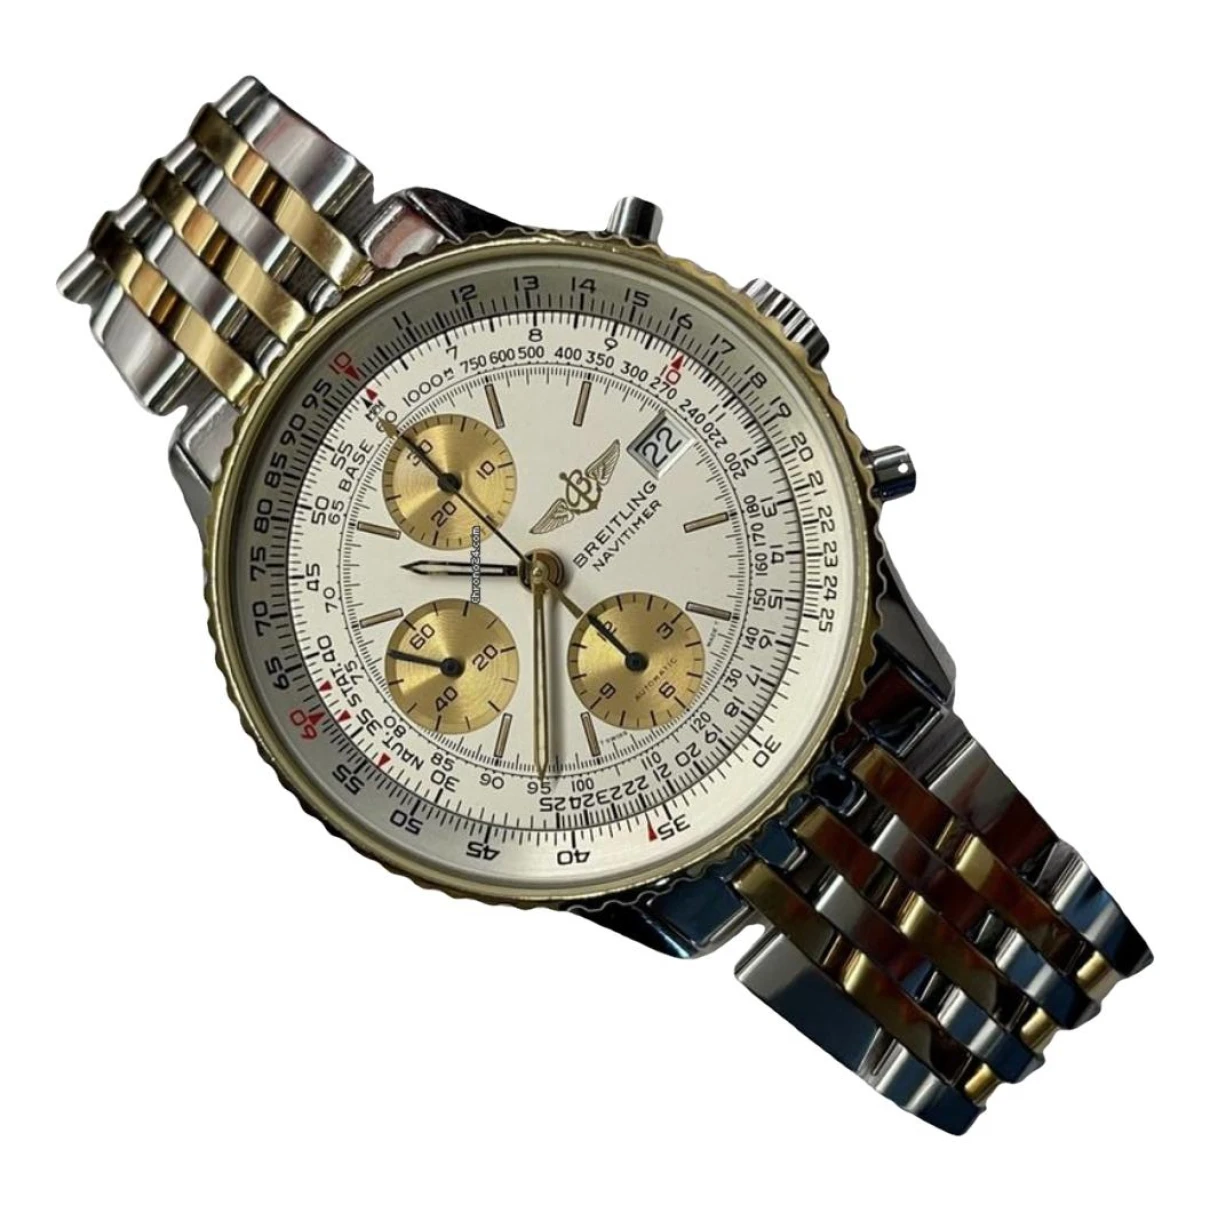 Pre-owned Breitling Navitimer Watch In White